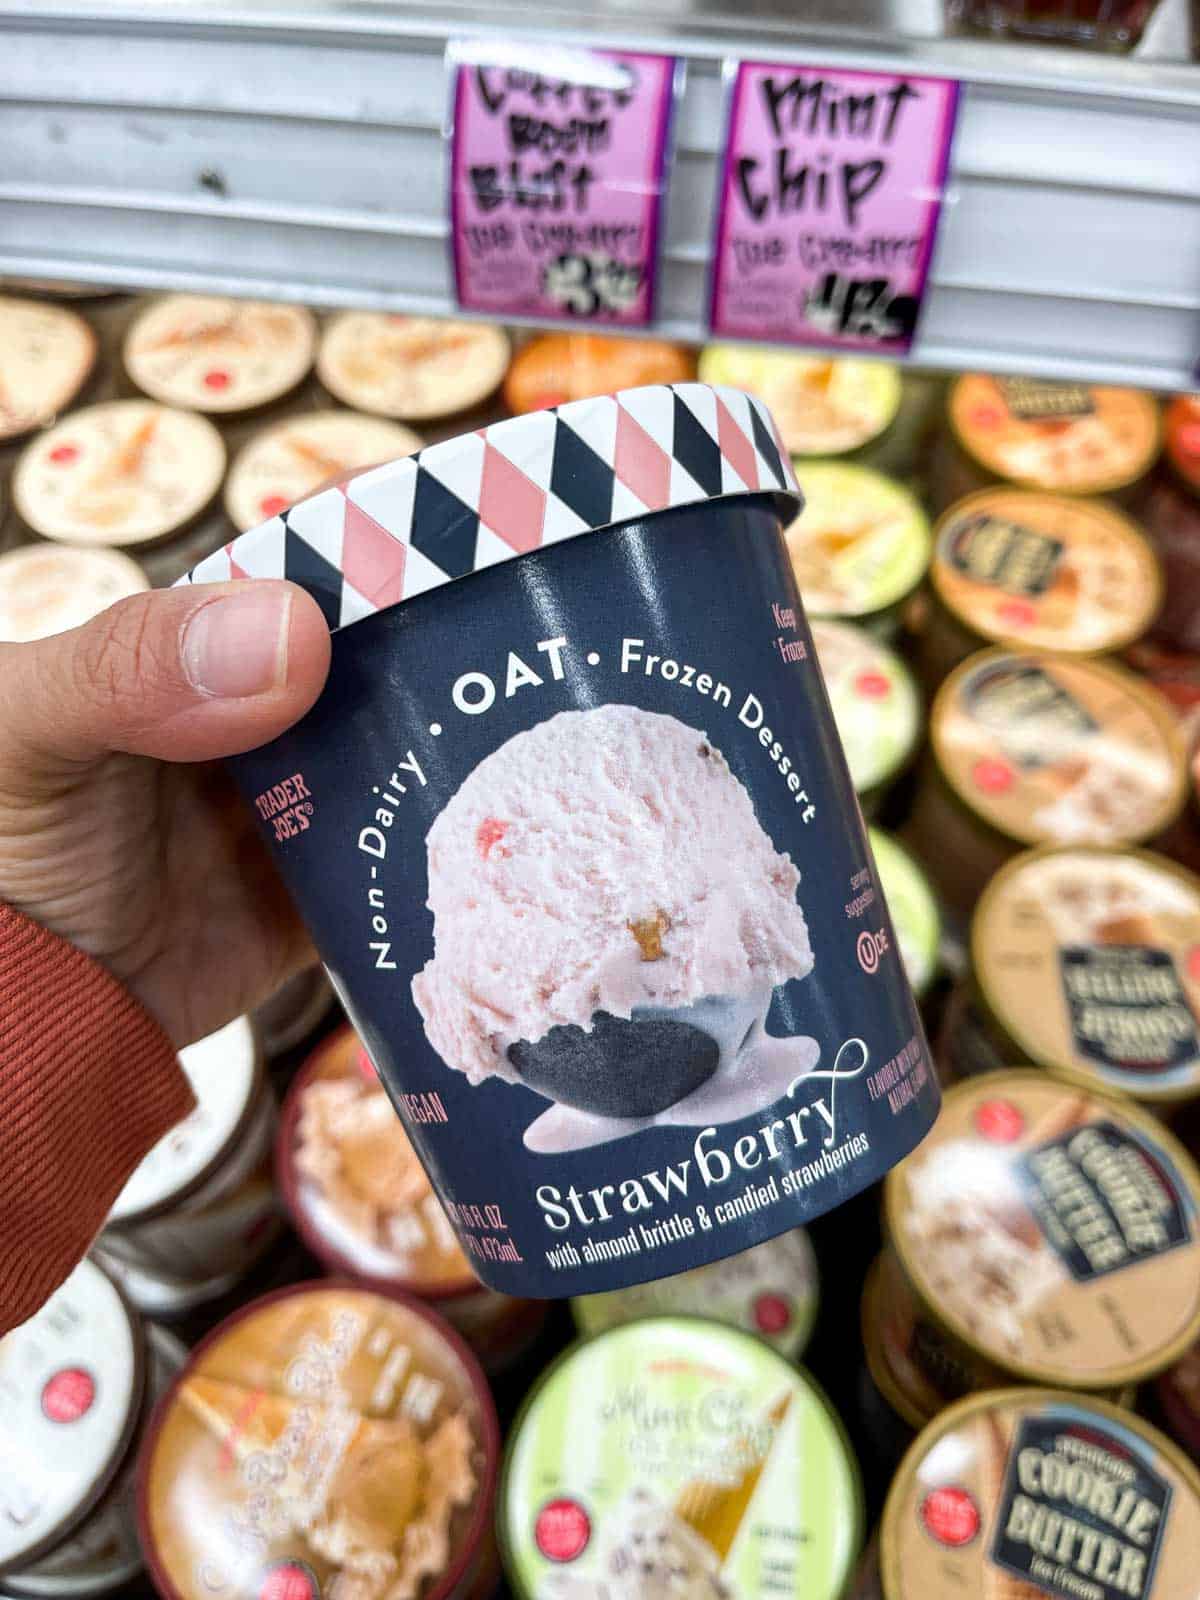 A hand holding a small pint of strawberry oatmilk ice cream in a blue and pink carton